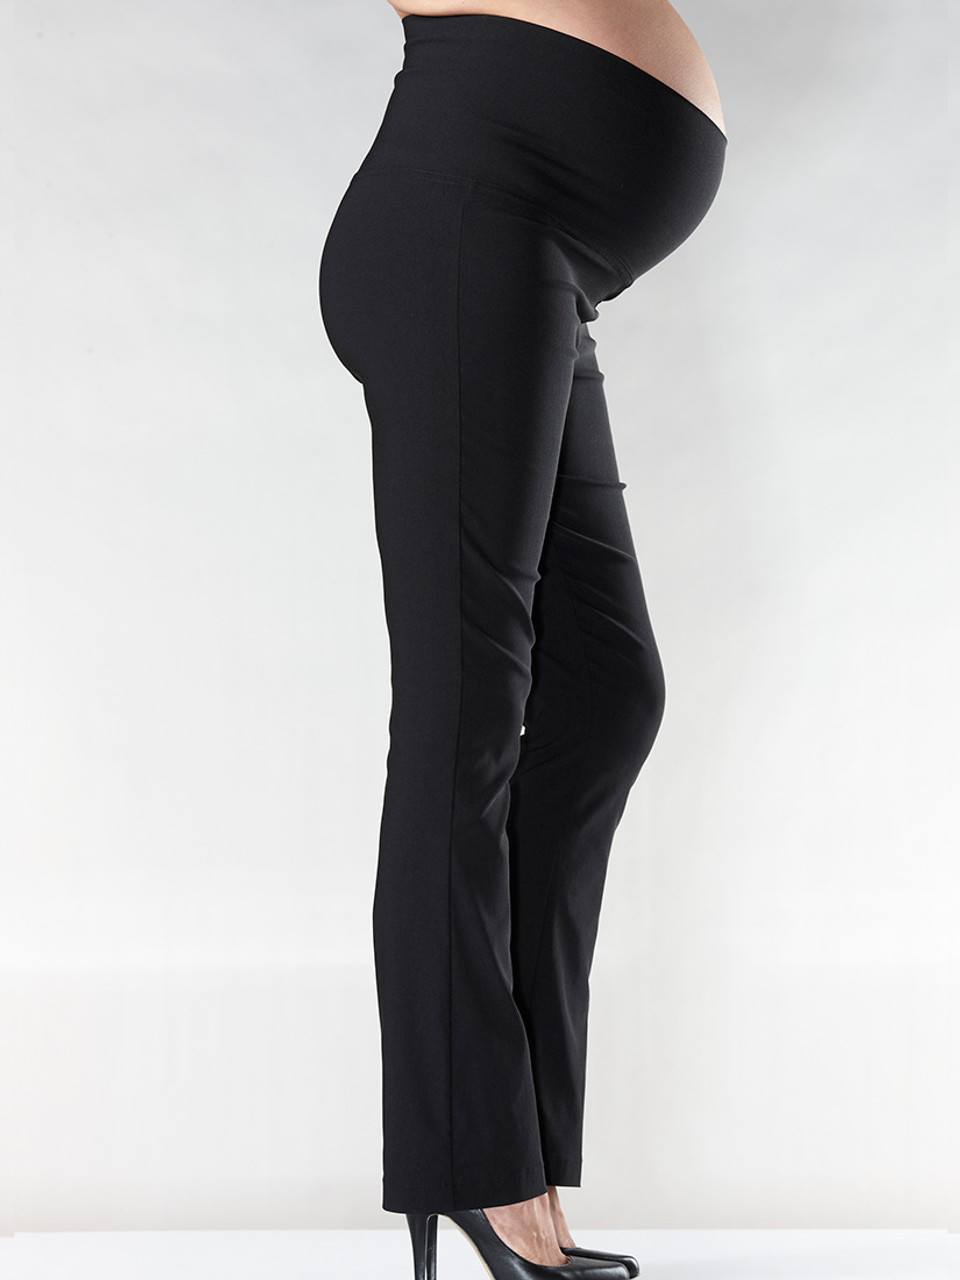 S Thyme maternity Dress Pants in Charcoal Grey – Happily Ever After  Maternity